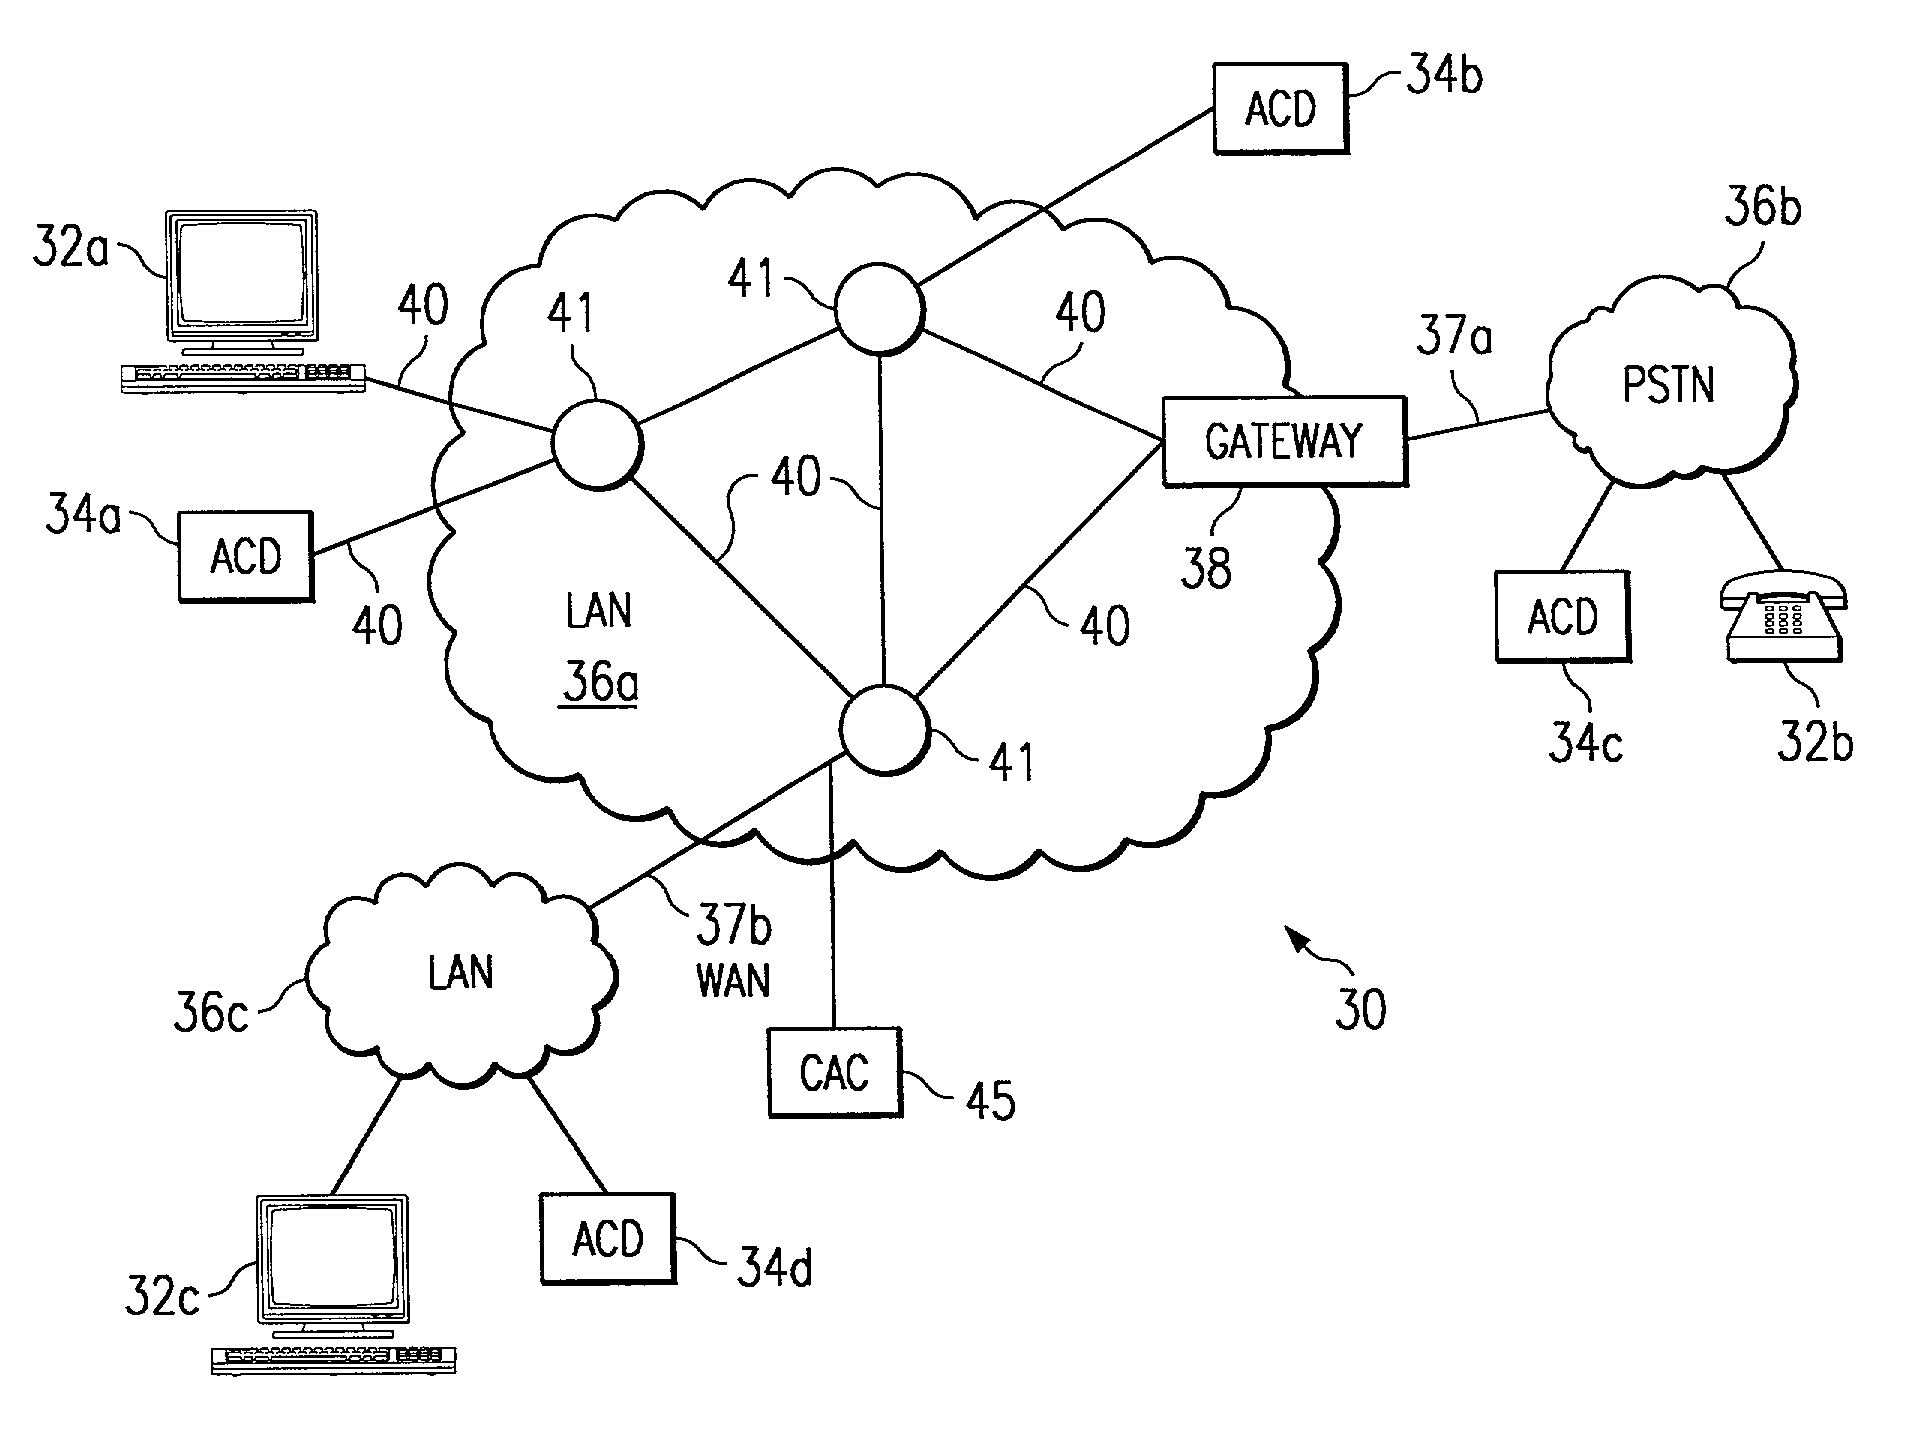 Method and system for automatic call distribution based on network resource availability and agent skills